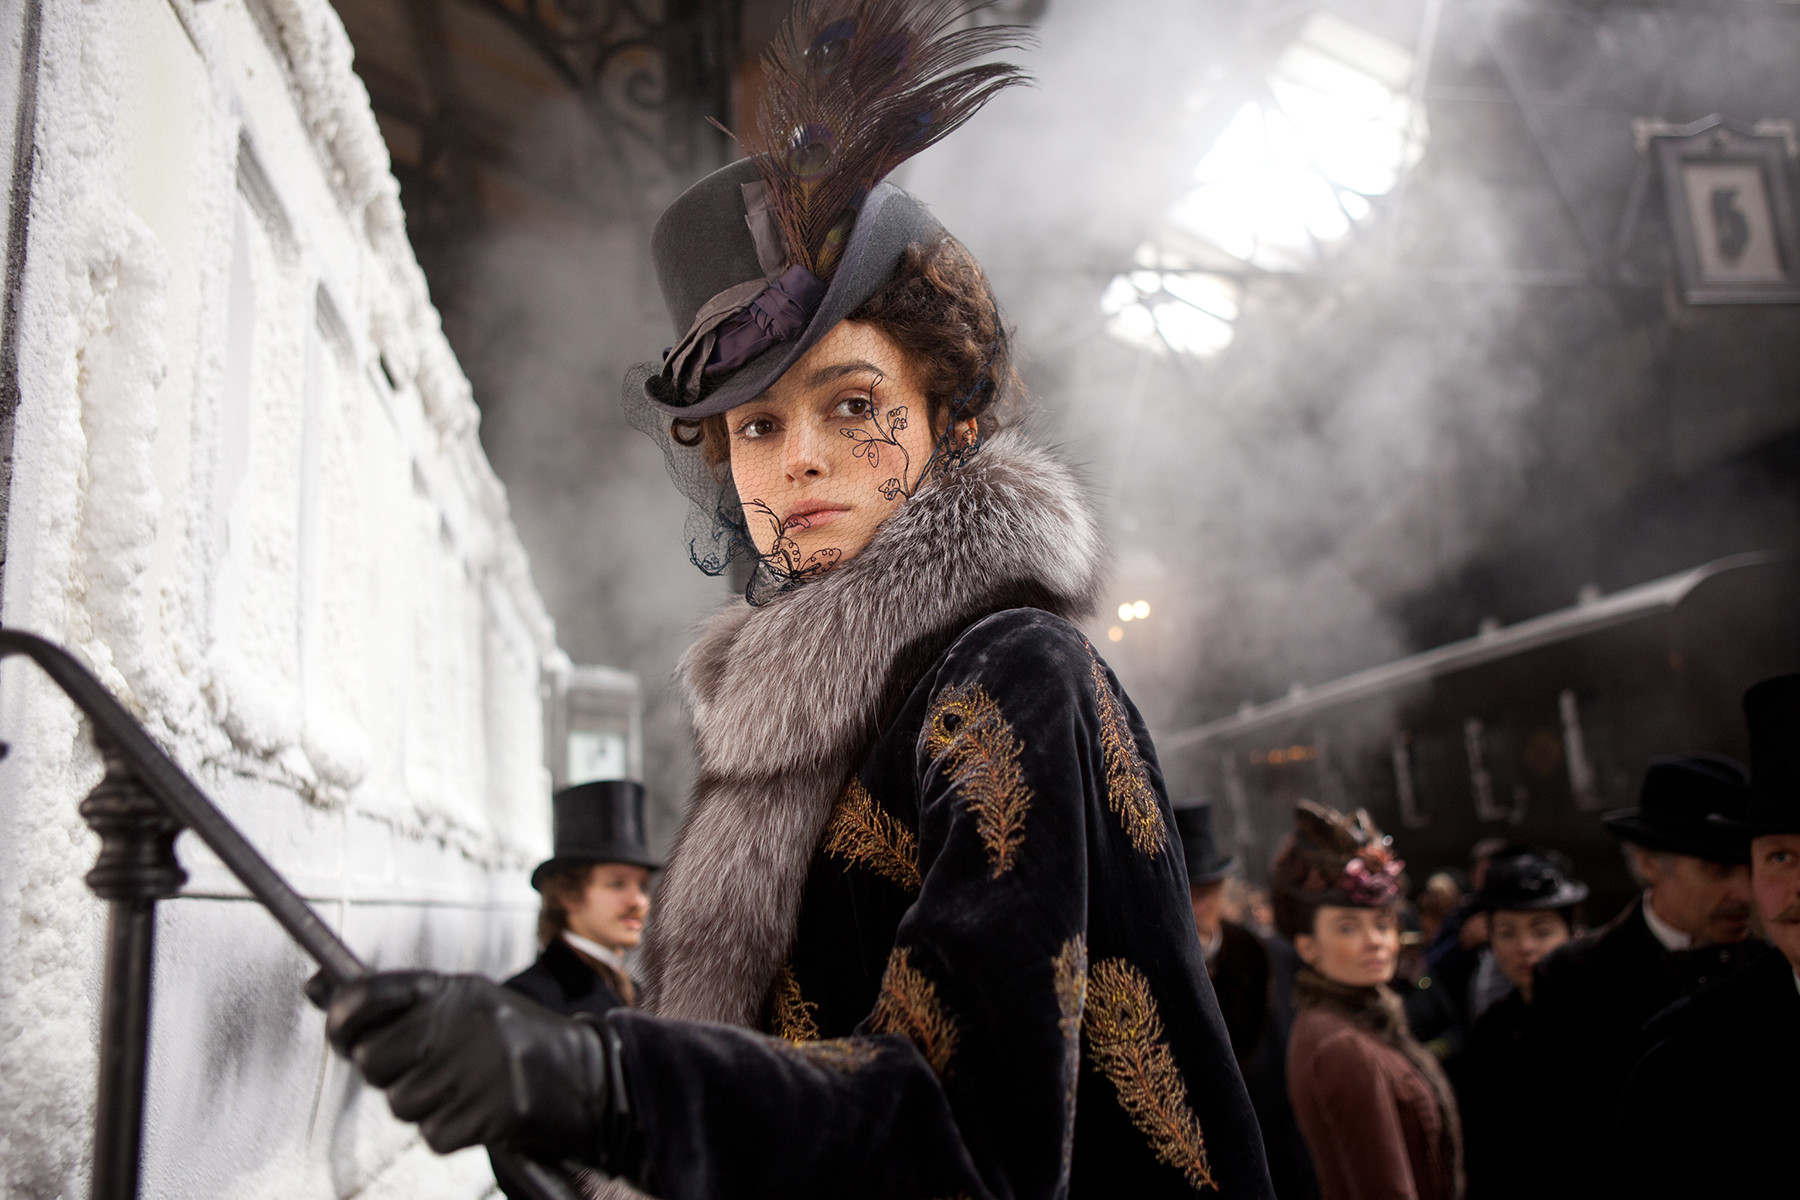 Perhaps Kira Knightley was a doubtful choice for the Karenina character yet Joe Wright's version attracted attention to Tolstoy's classic one more time.